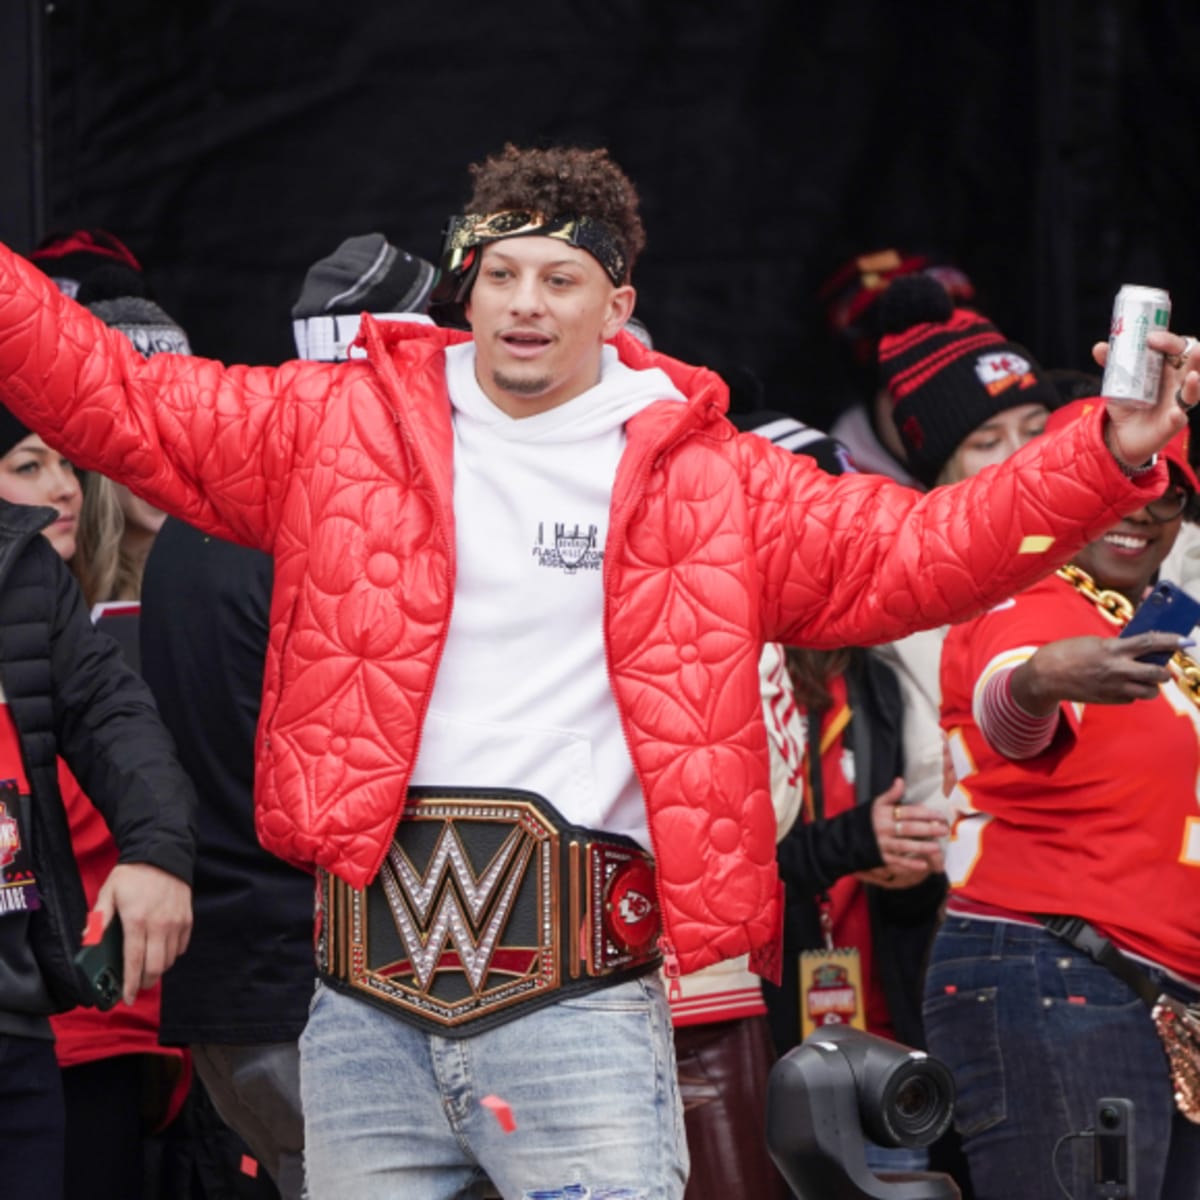 Patrick Mahomes Getting Called Out For Championship Parade Speech